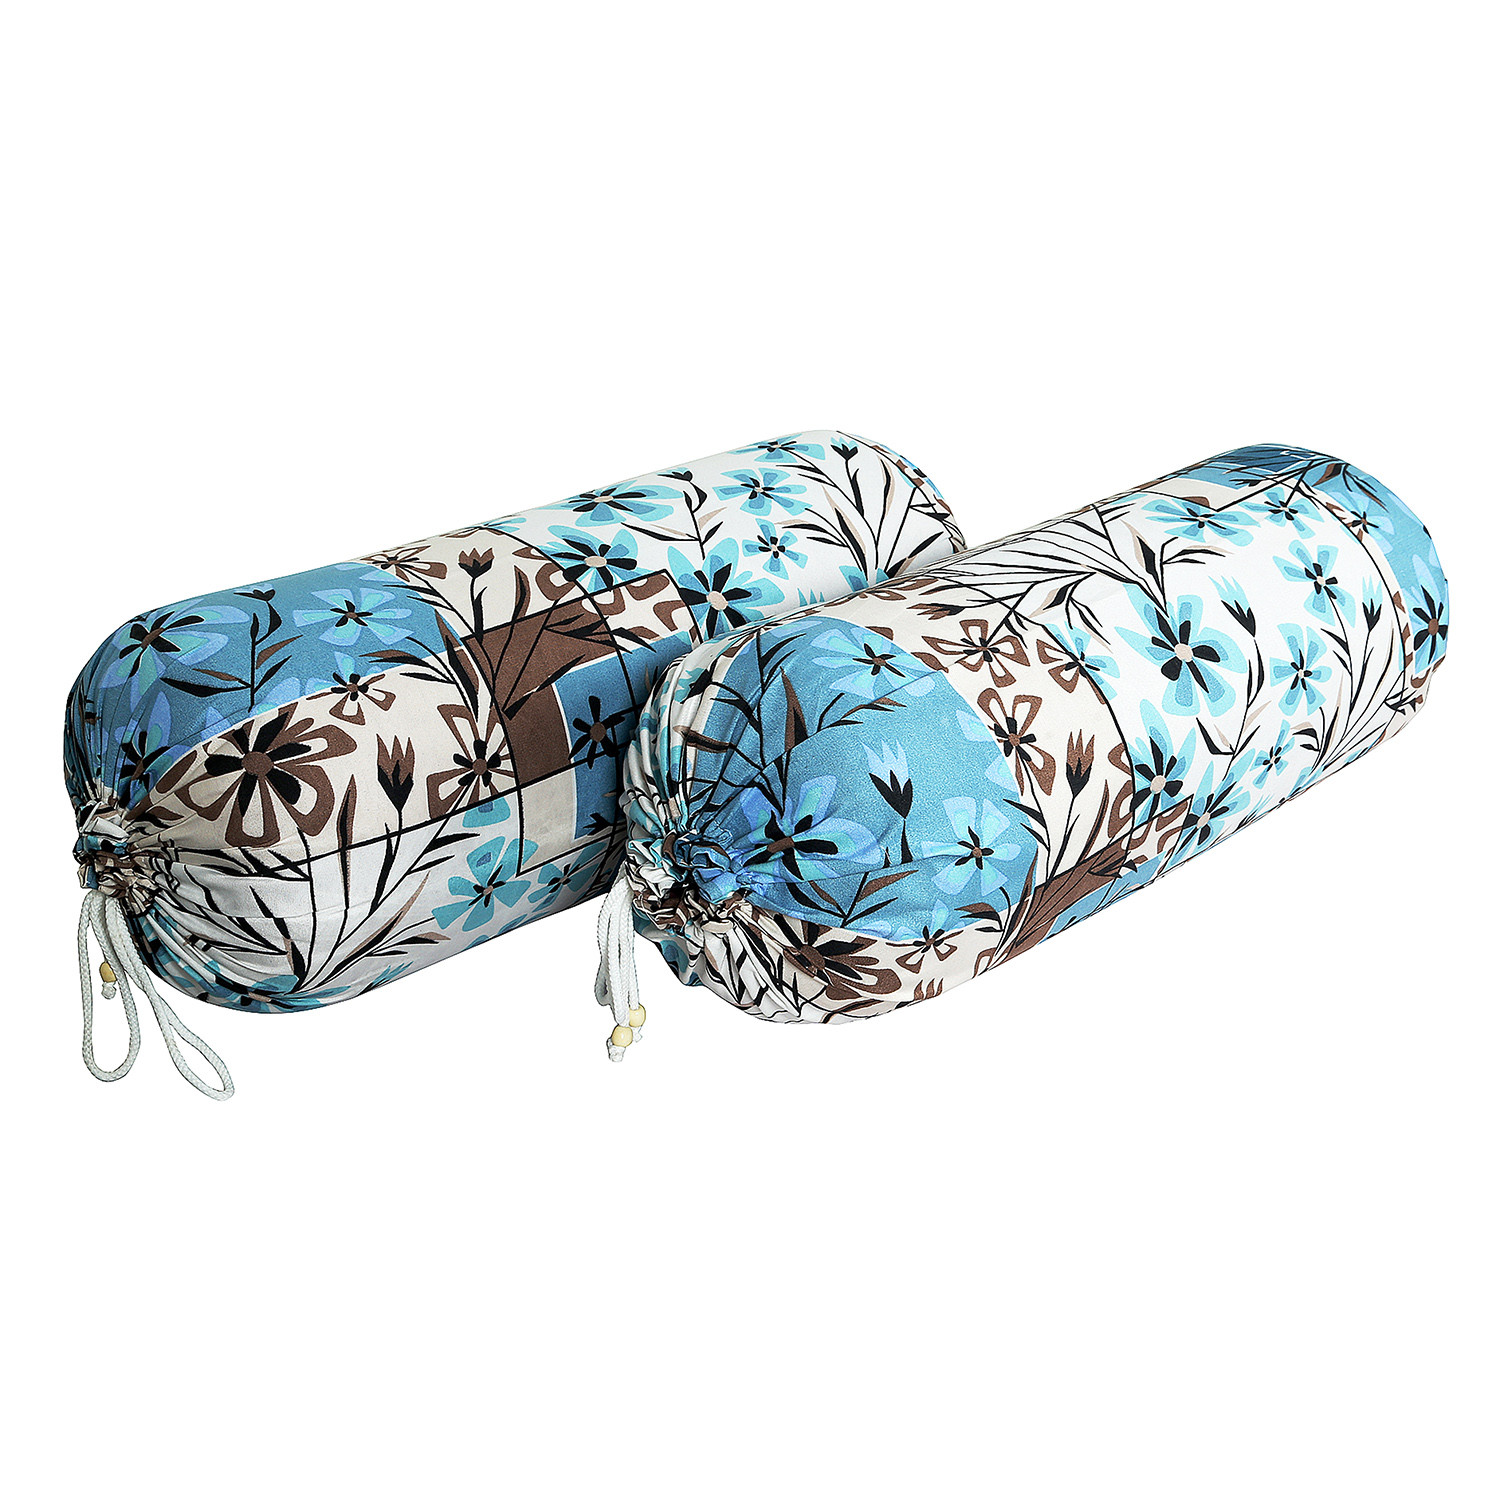 Kuber Industries Bolster Covers | Soft Cotton Bolster Cover Set | Diwan Round Bolster Pillow Covers |  Flower-Check Print Roll Masand Cover | 16x32 Inch |Blue